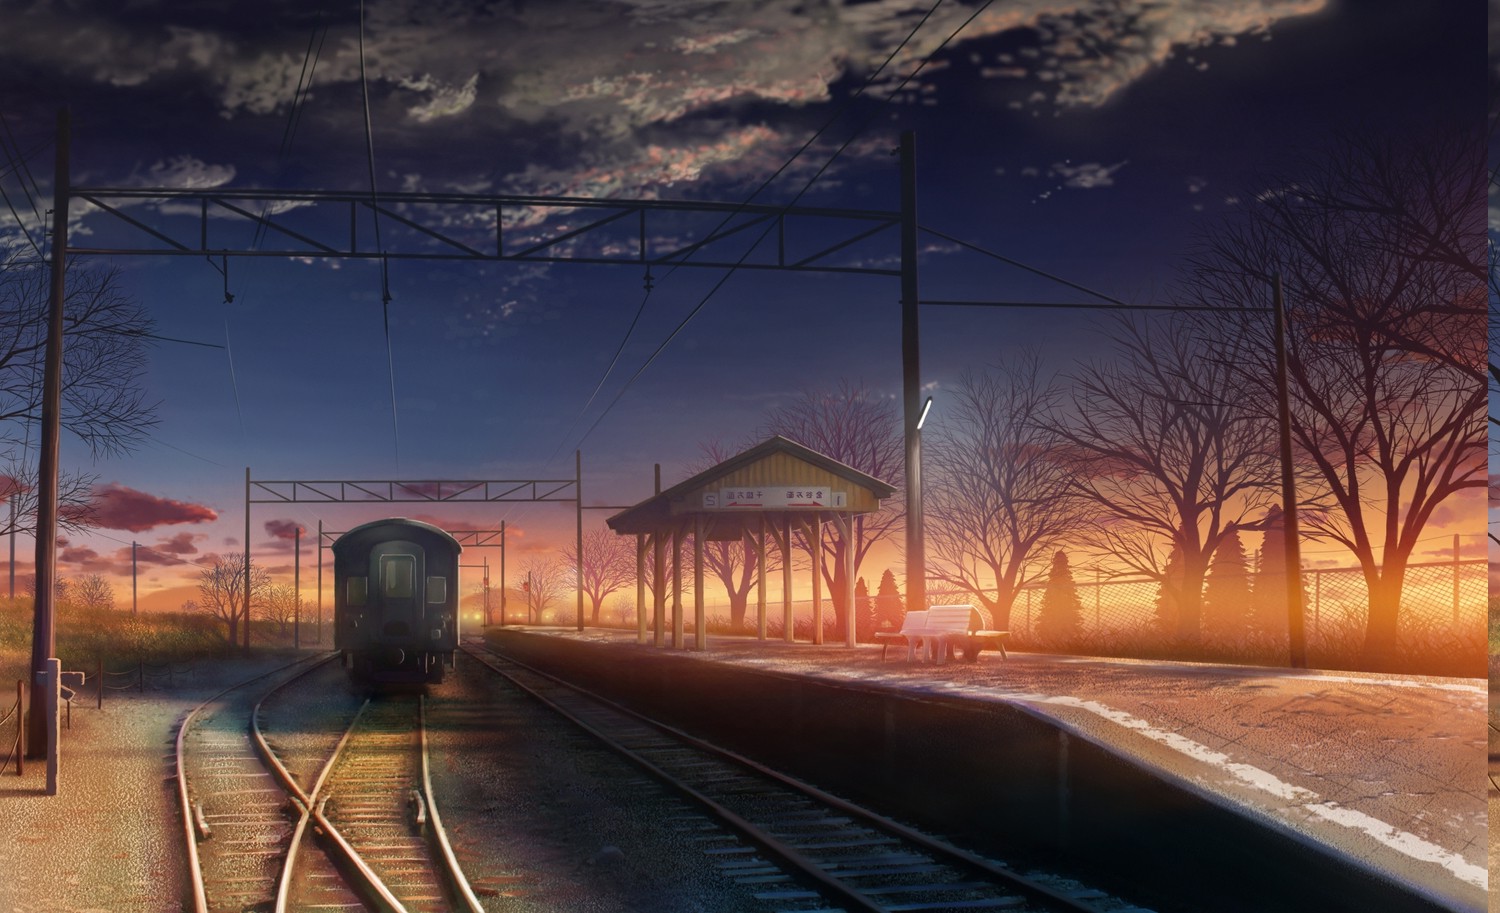 Train Anime 1500x913 Wallpaper Teahub Io Like a normal wallpaper, an animated wallpaper serves as the background on your desktop, which is visible to you only the only difference with desktop wallpaper is that an animated wallpaper, as the name implies, is animated, much like an animated screensaver but, unlike screensavers, keeping. train anime 1500x913 wallpaper